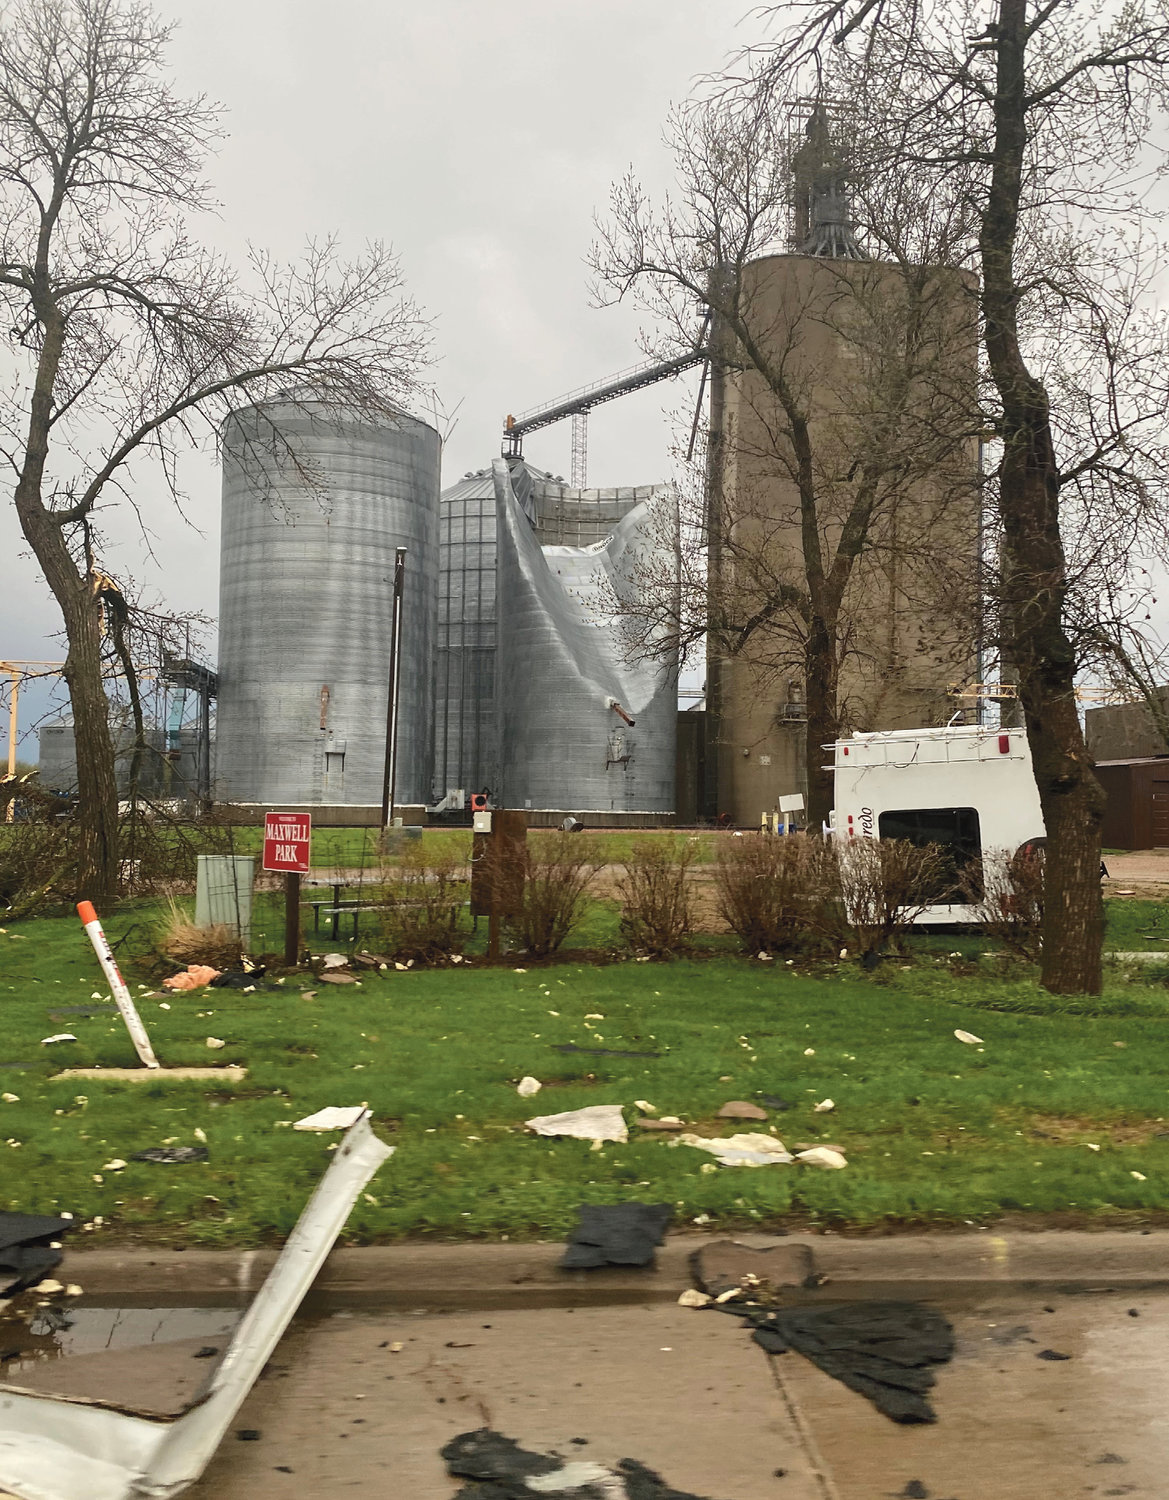 The east side of Kingsbury County sustained the heaviest damage in Thursday's derecho. In Arlington, the storm damaged a grain bin, overturned a camper trailer, and spread debris.